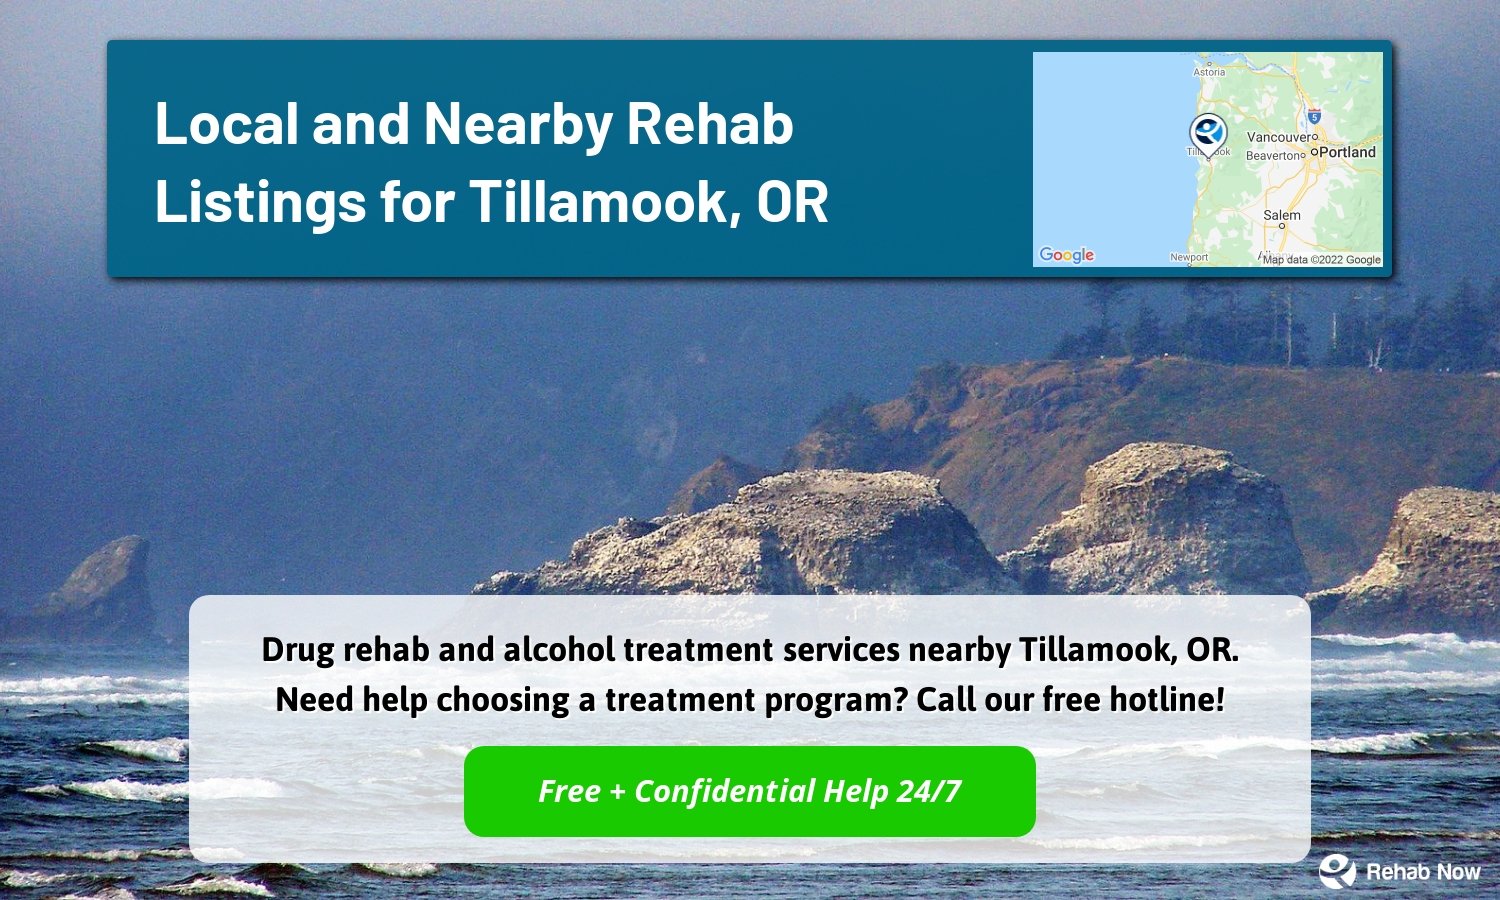 Drug rehab and alcohol treatment services nearby Tillamook, OR. Need help choosing a treatment program? Call our free hotline!